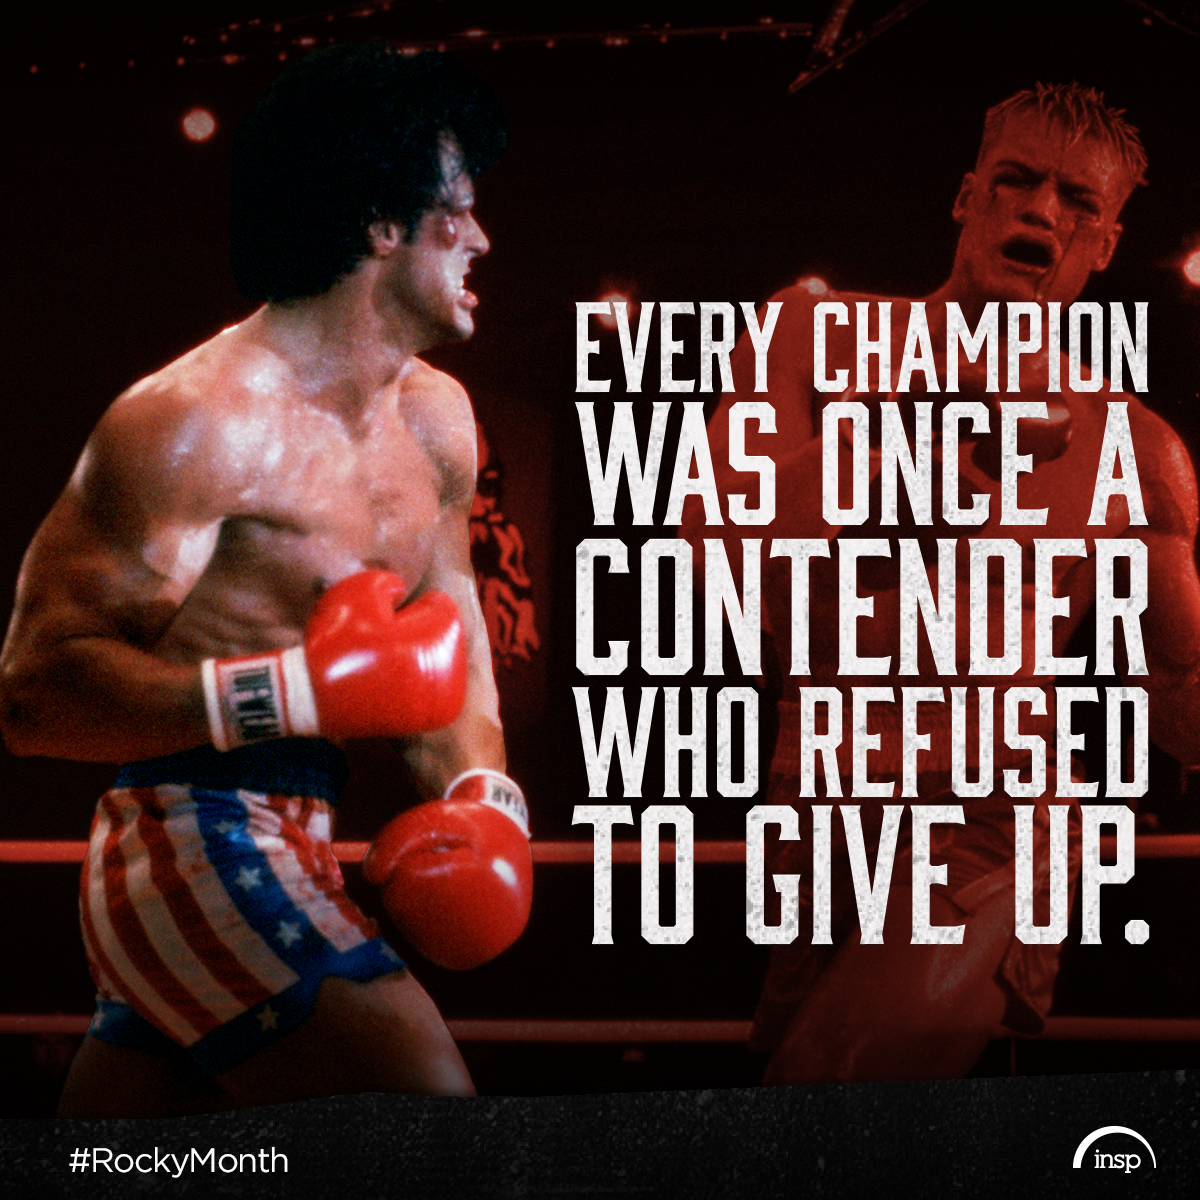 Rocky's Most Inspiring Quotes - INSP TV | TV Shows and Movies